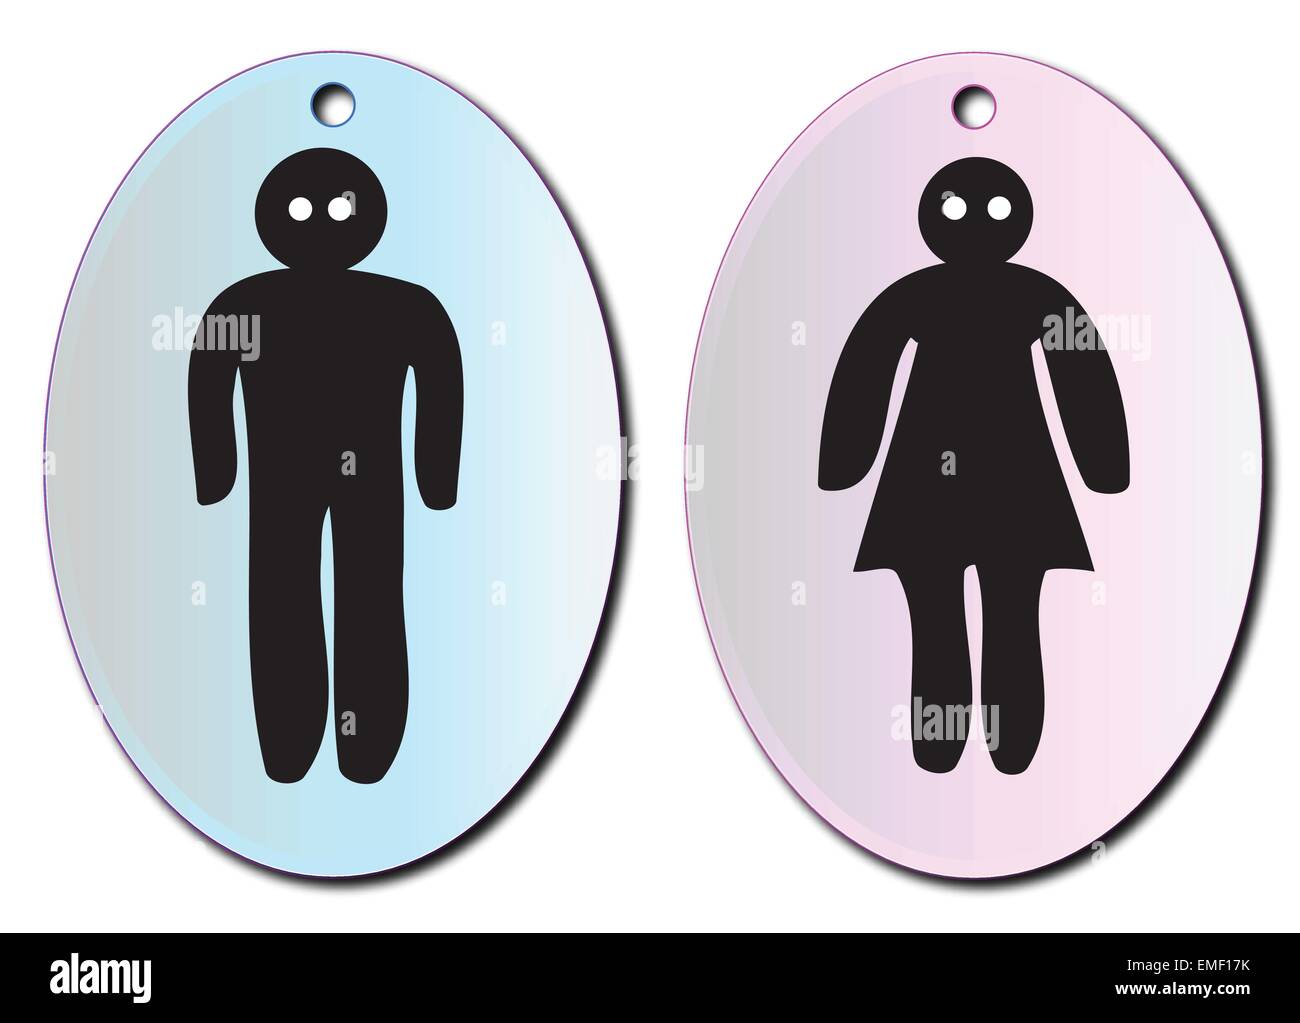 Toilet Signs Stock Vector